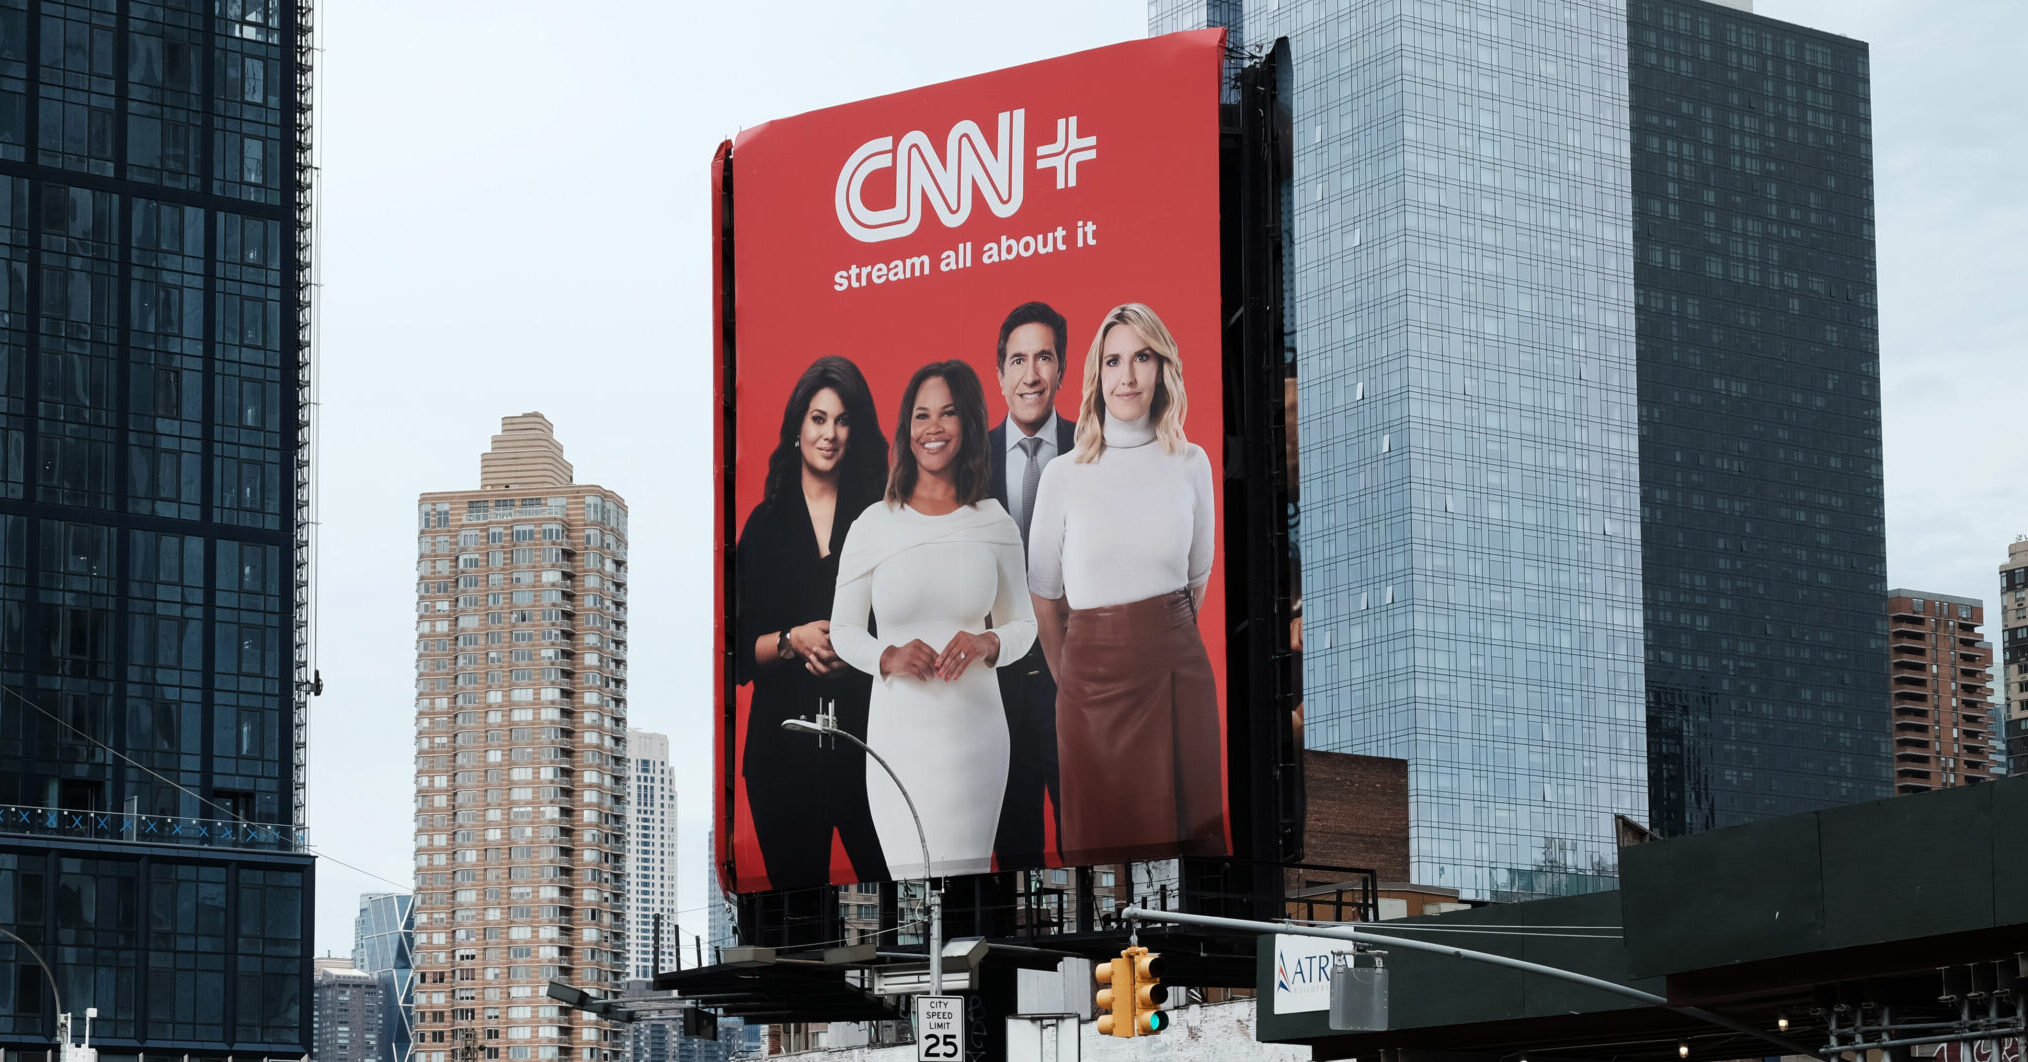 Fired CNN+ Staffers Were Reportedly Given Boxes Filled With CNN+ Swag and Welcome Notes